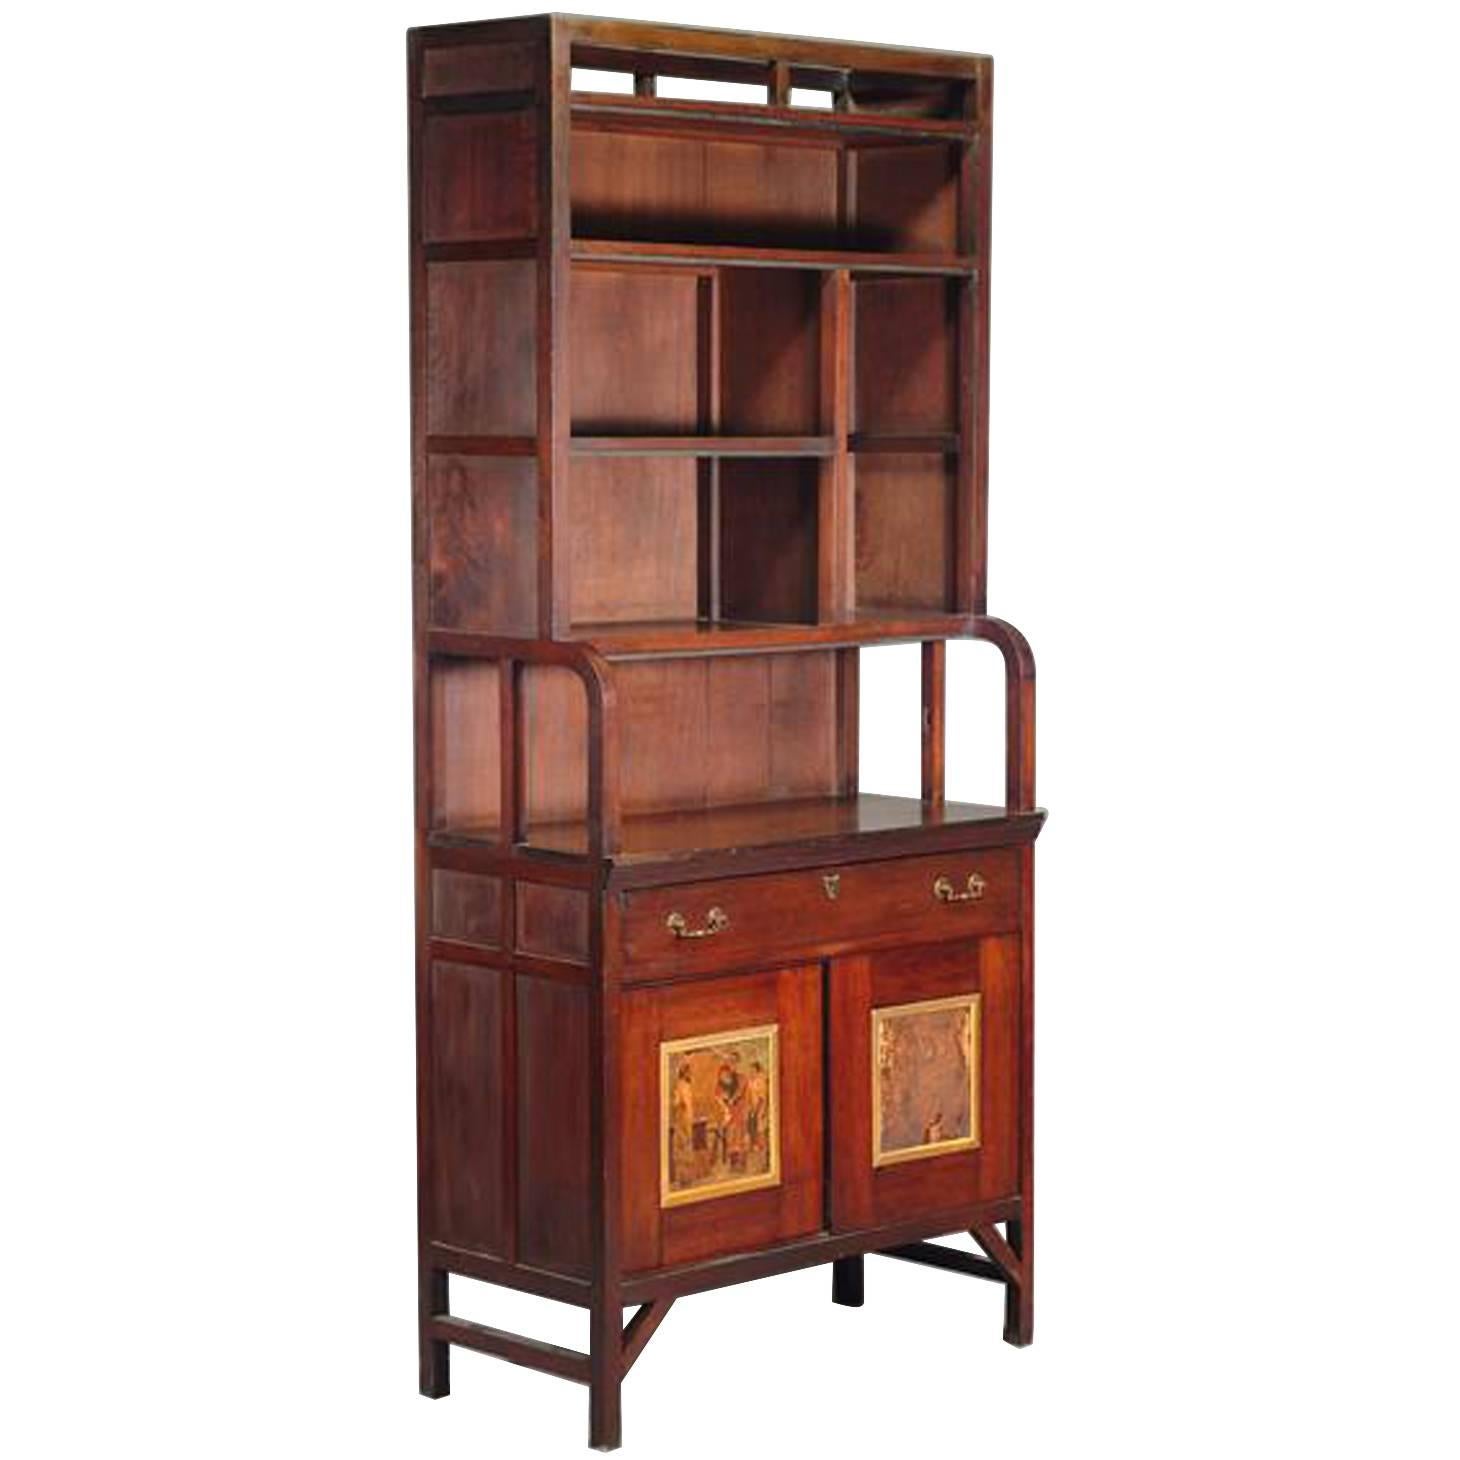 E W Godwin An Important Anglo-Japanese Bookcase Painted by Henry Stacy Marks For Sale